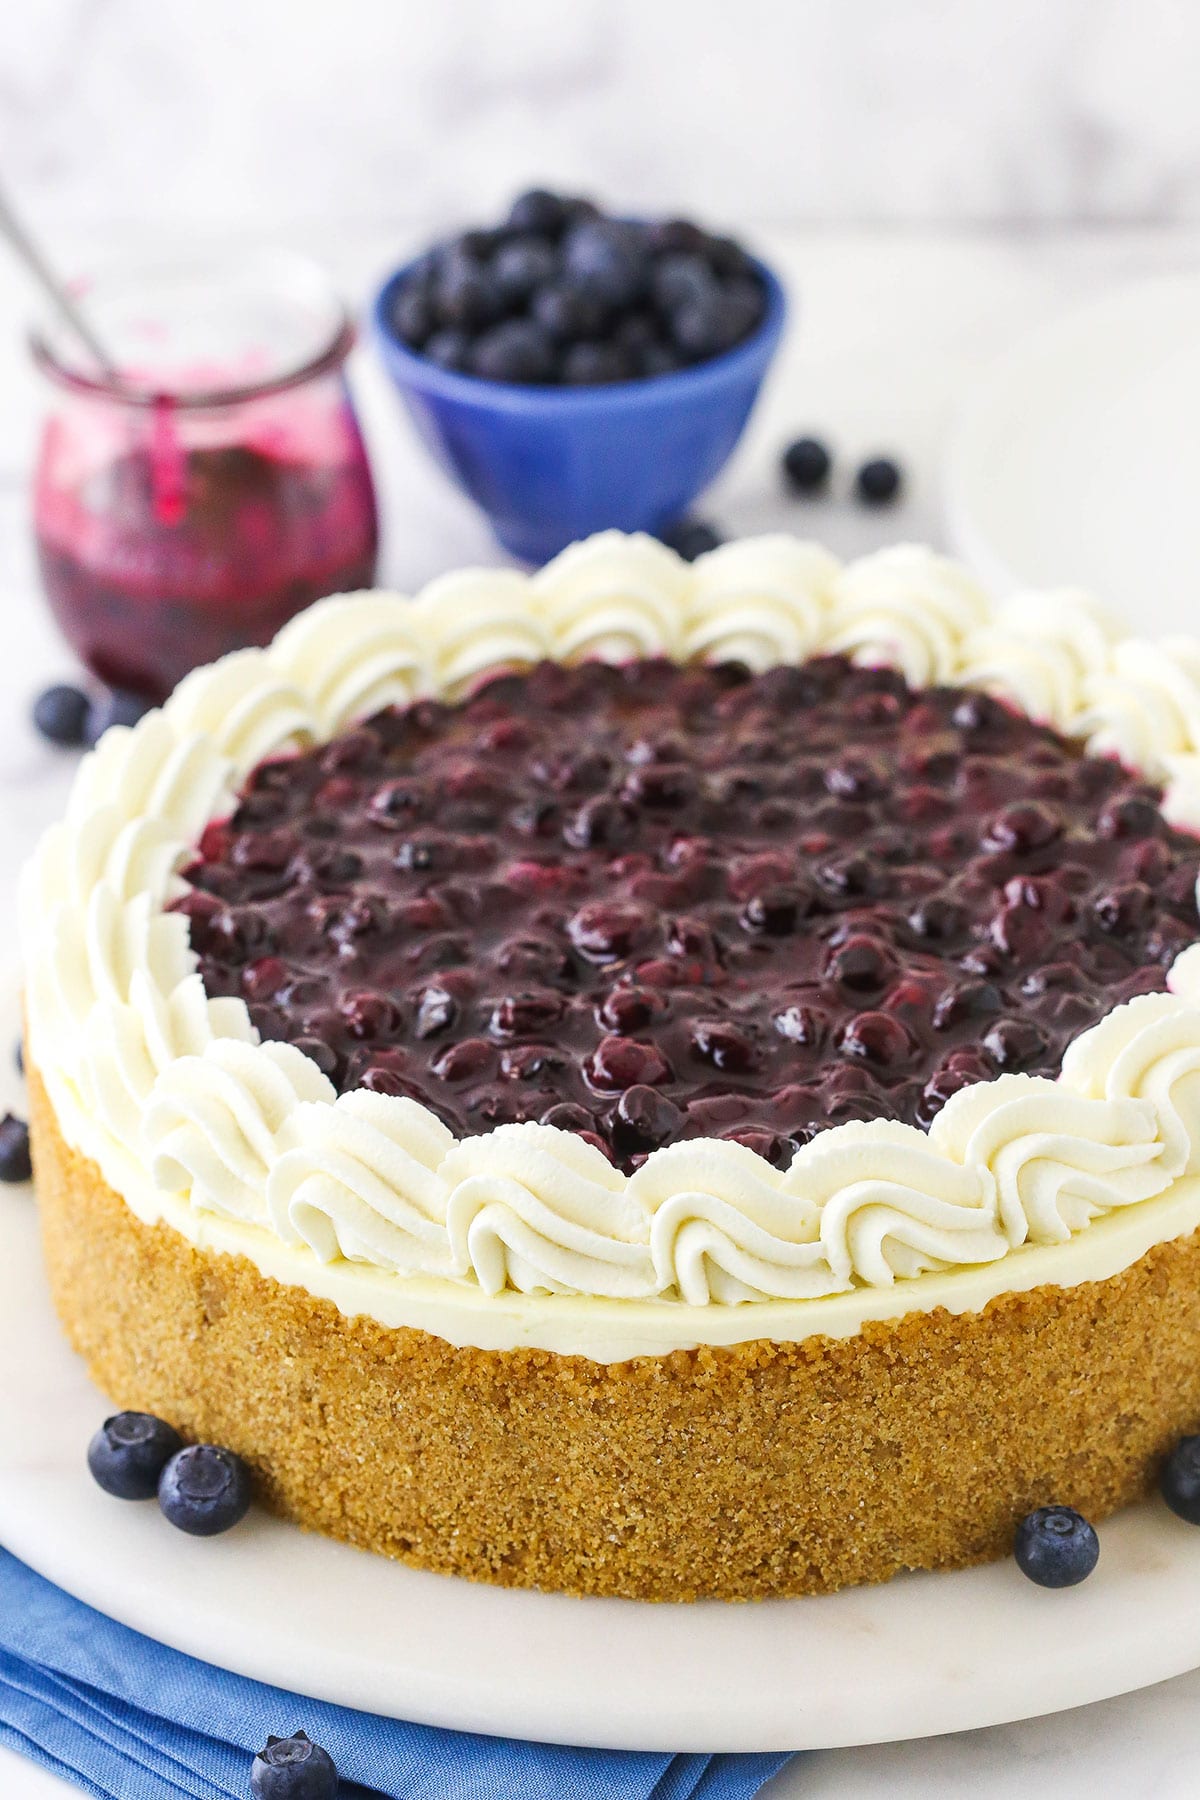 A no-bake blueberry cheesecake on top of a serving plate with a stack of blue napkins underneath the plate